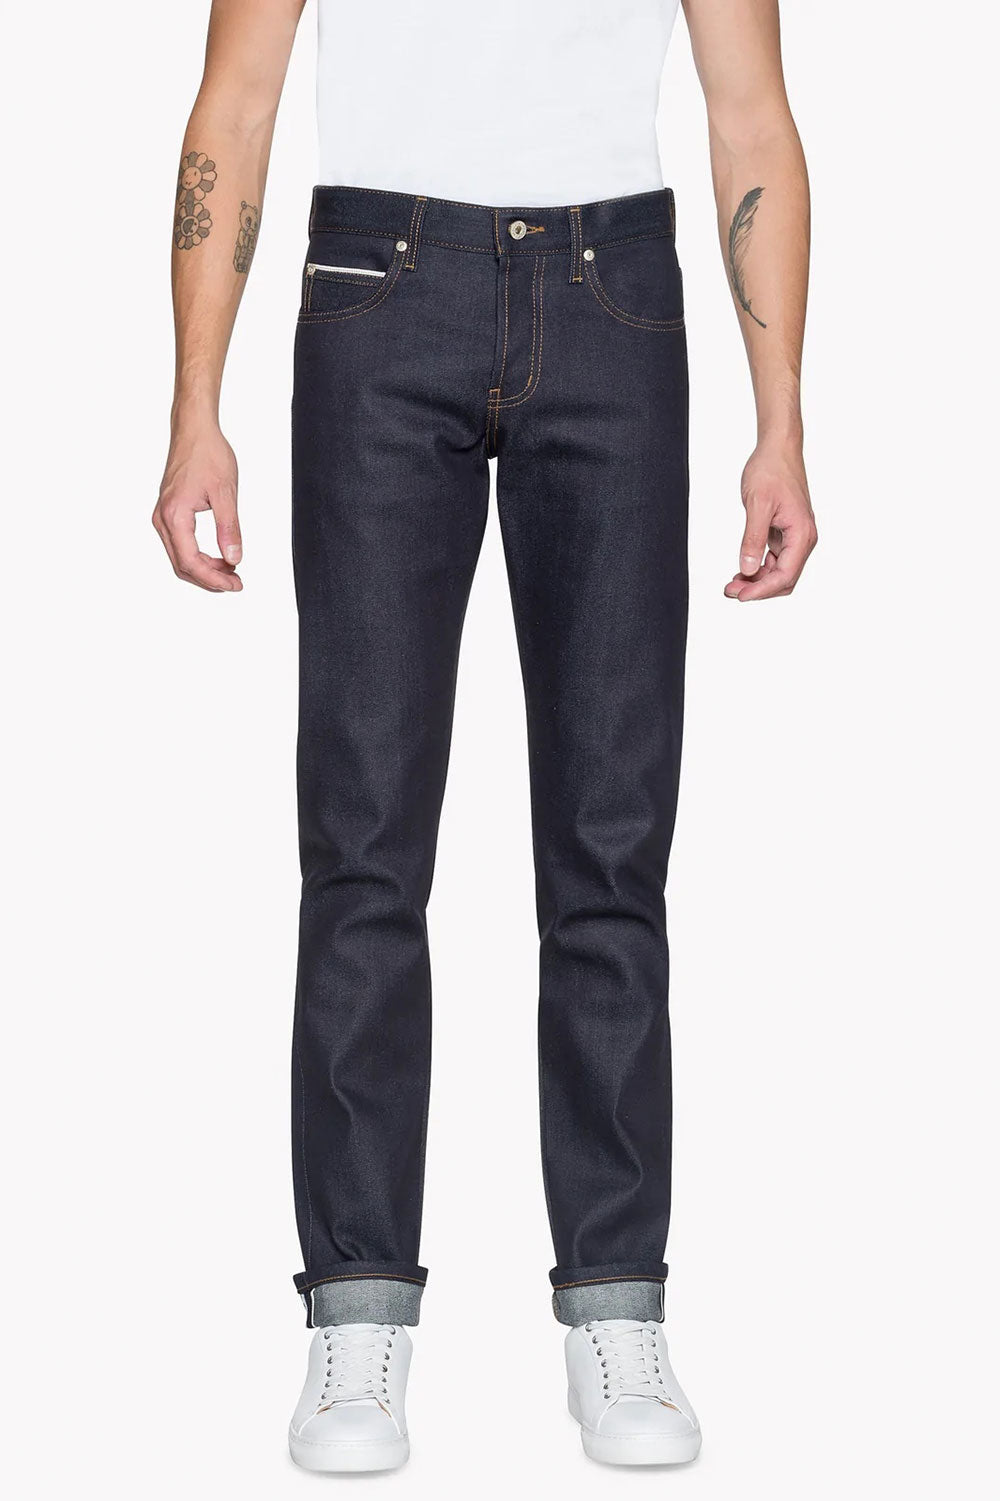 Naked & Famous - Super Guy - Nightshade Stretch - Front